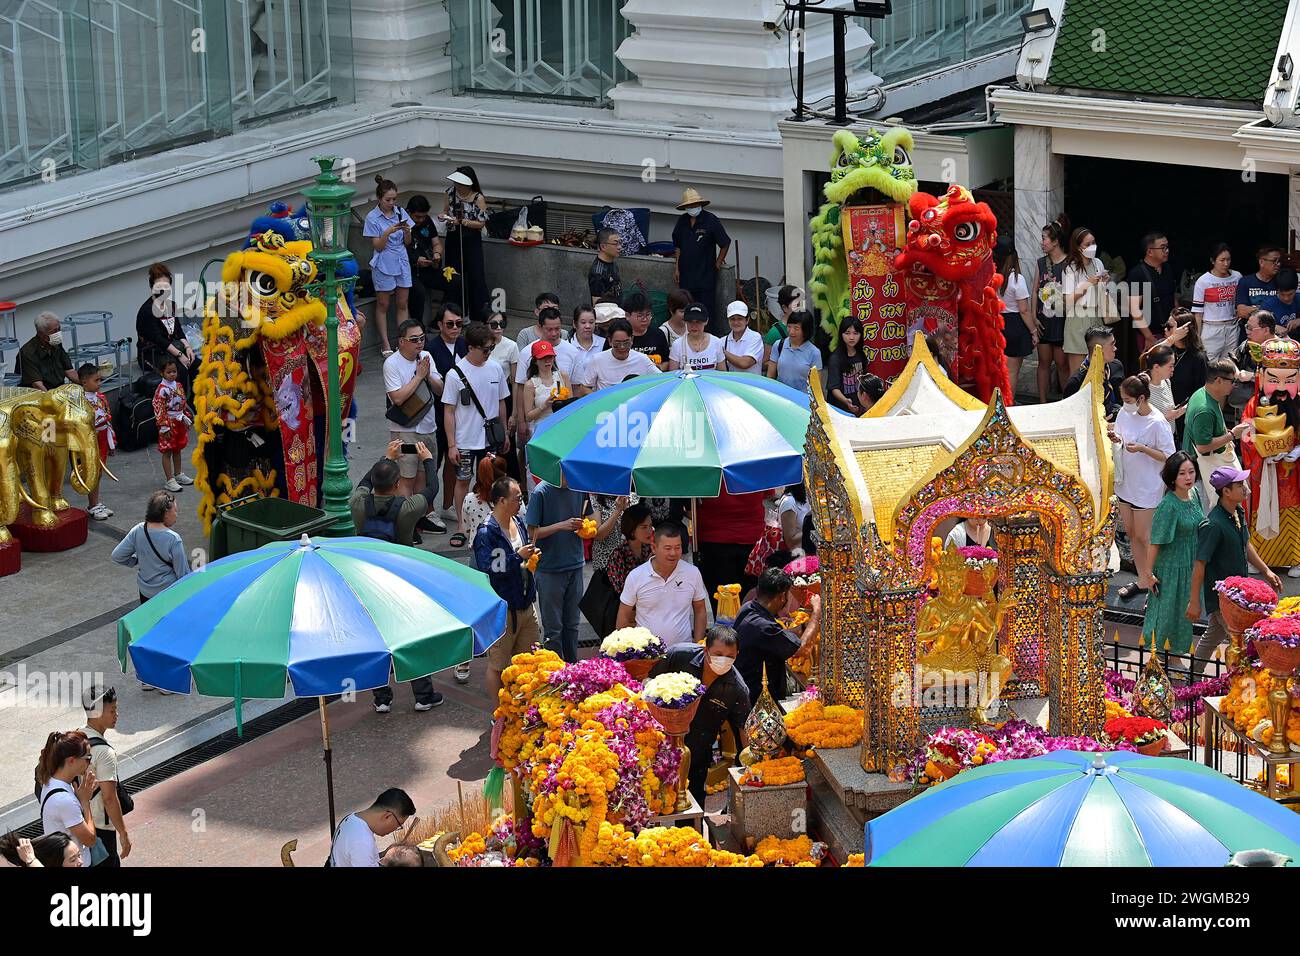 The Erawan shrine is a popular tourist destination in Bangkok & visitors come here to pray for good fortune & protection, seen with lion dance troupe Stock Photo